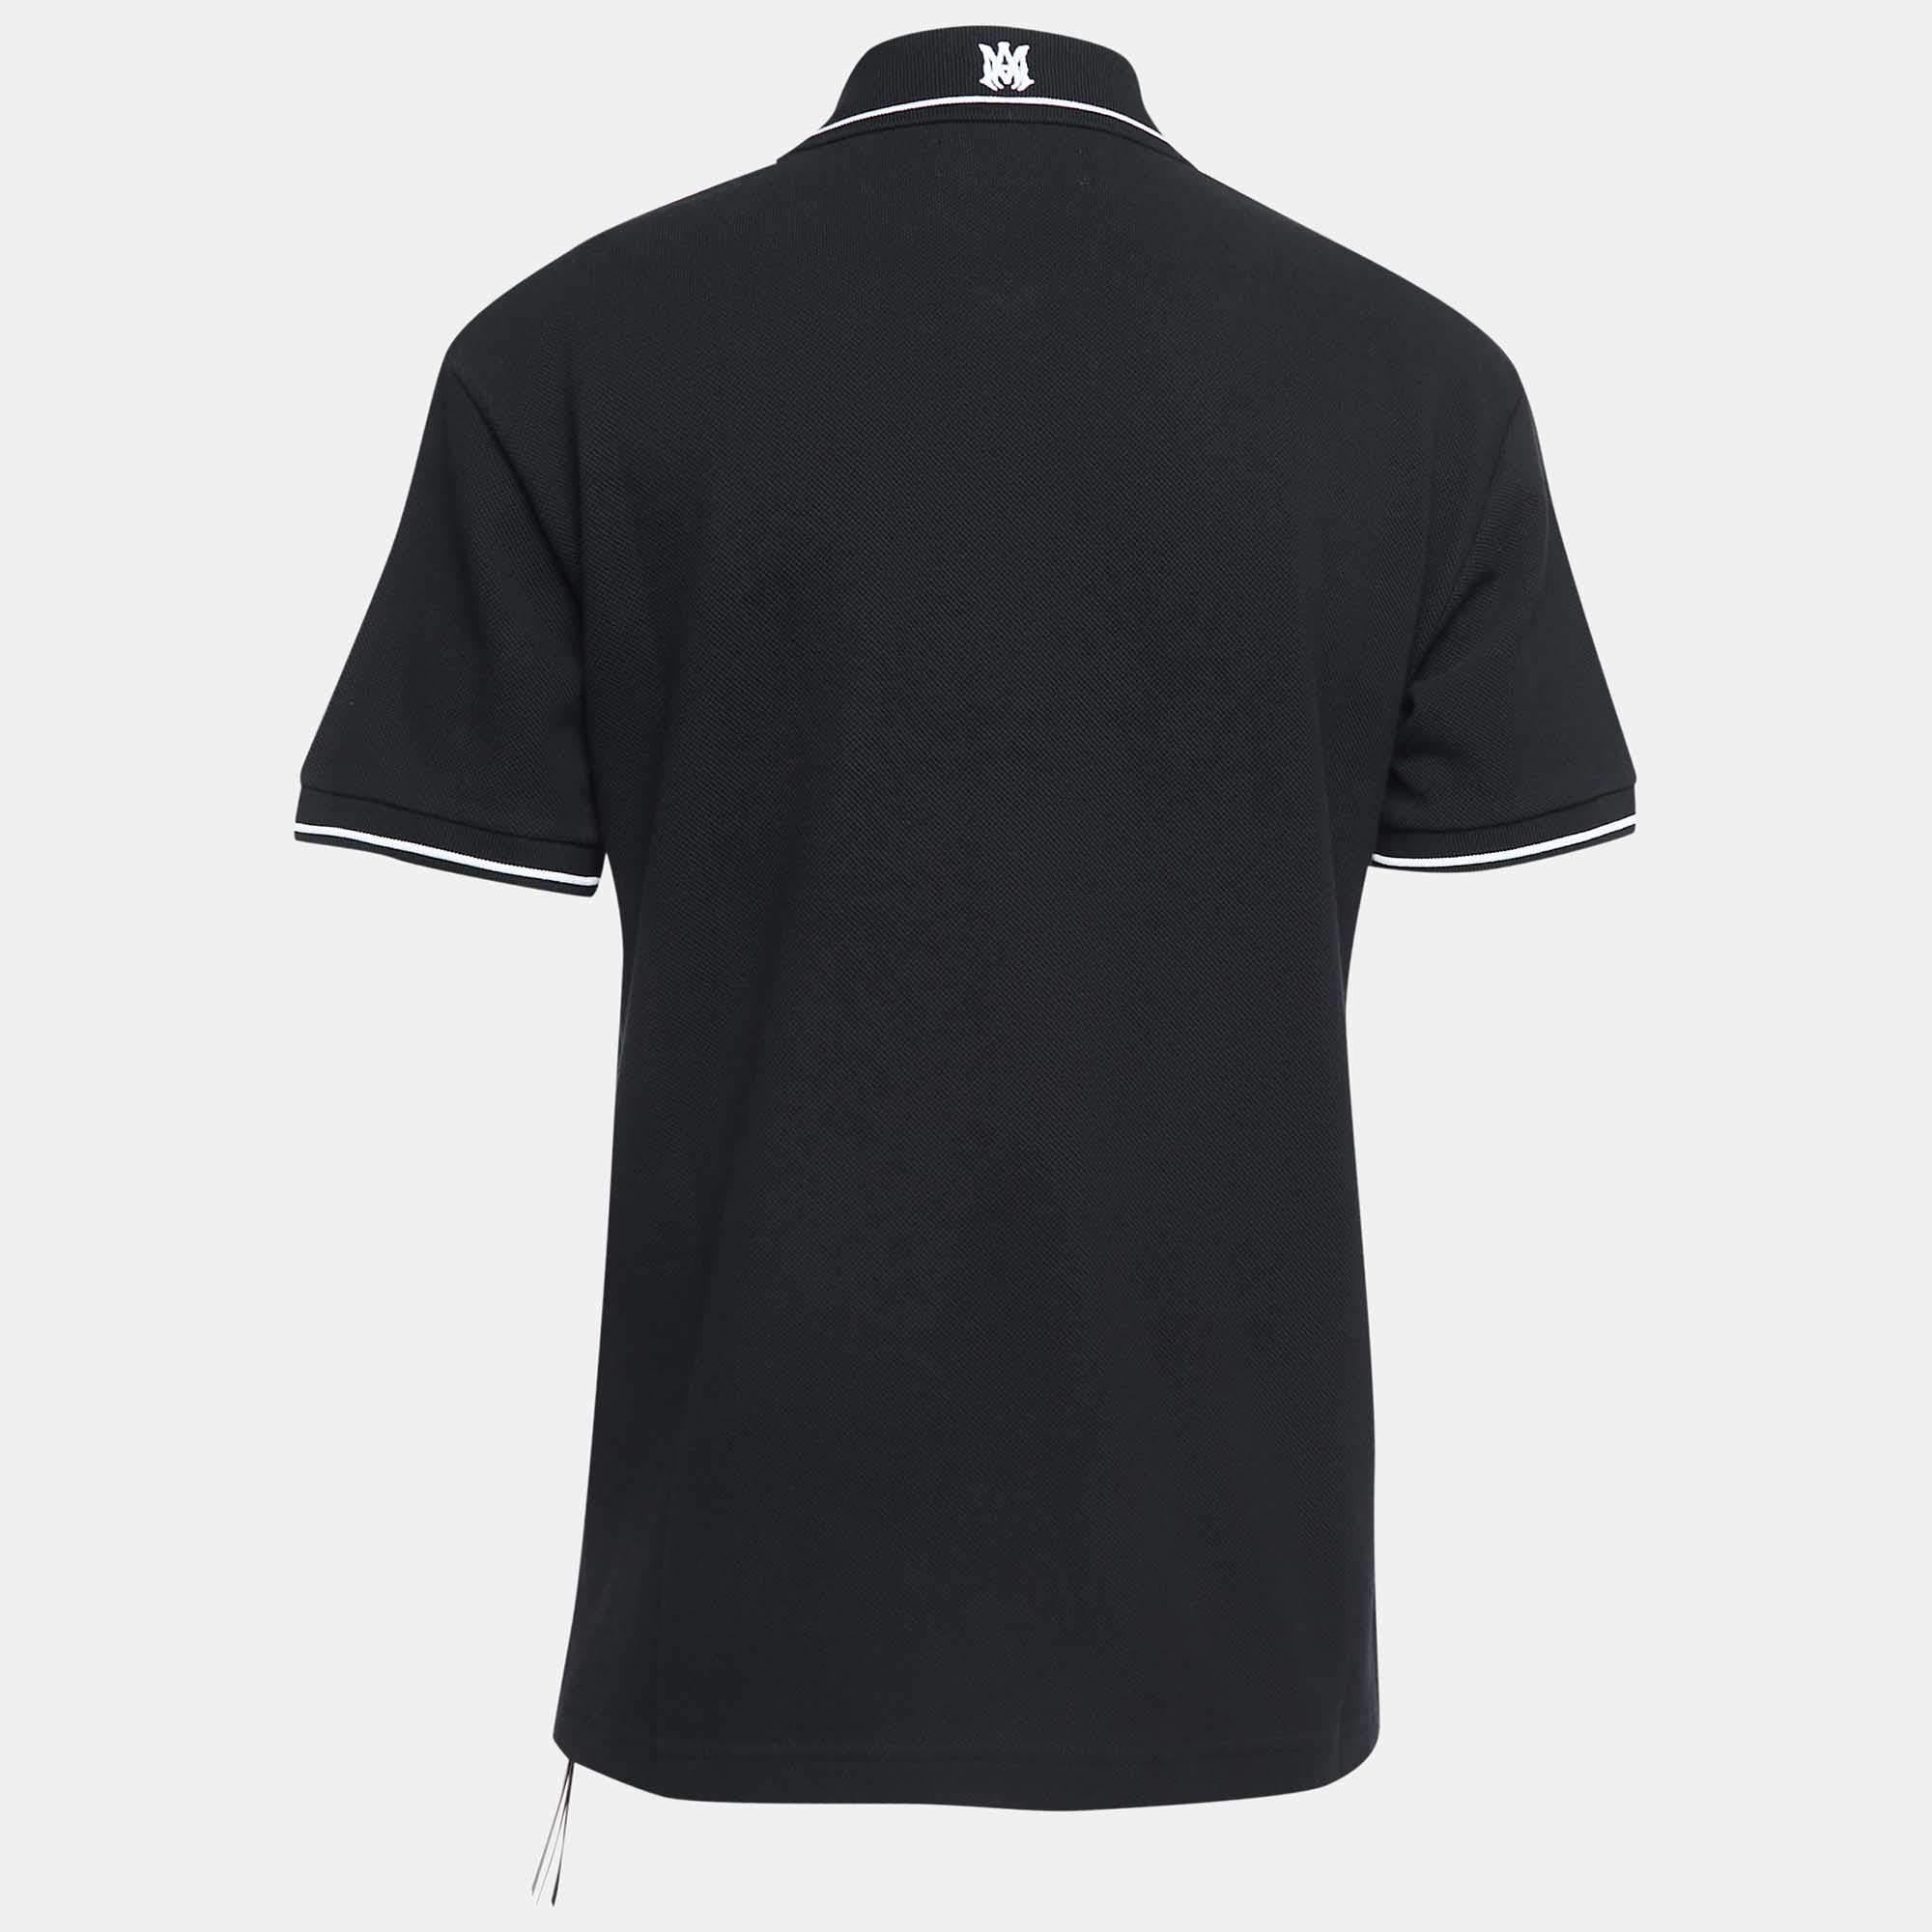 Polo t-shirts have always been a classic pick for anyone. This iteration is tailored using the best fabrics for a comfortable fit. Complete your casual look with a pair of shorts and sneakers.

